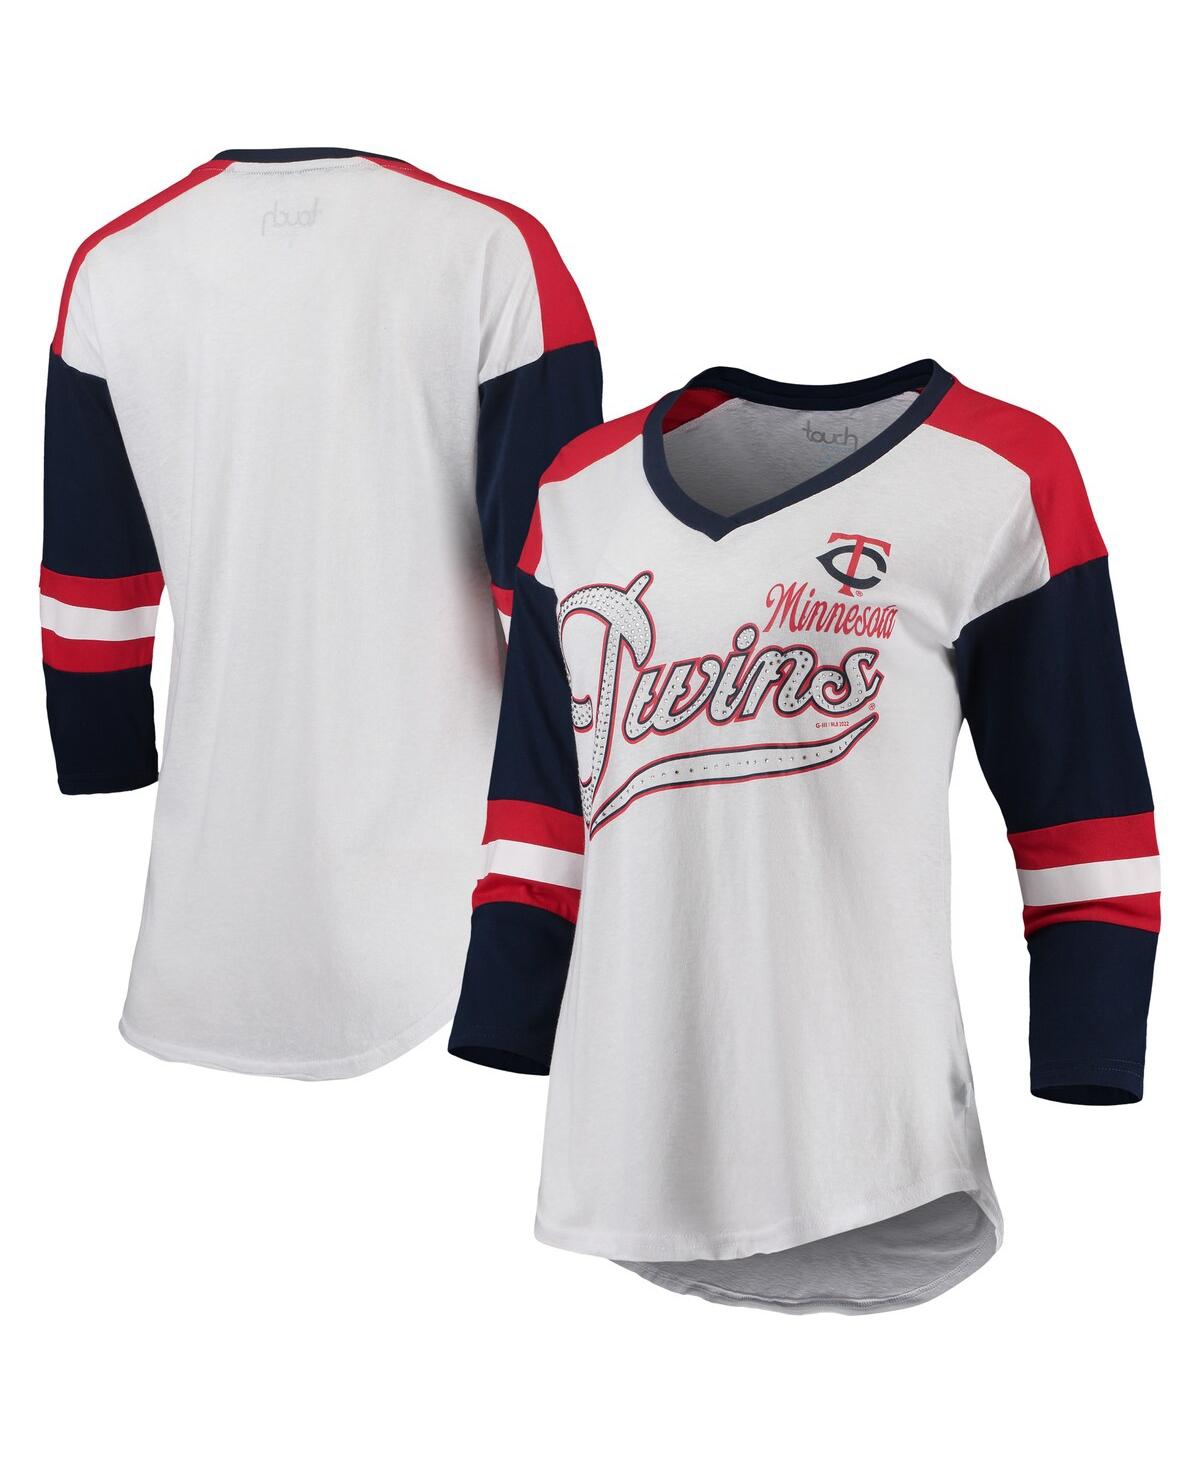 Women's Touch White and Red Minnesota Twins Base Runner 3/4-Sleeve V-Neck T-shirt - White, Red